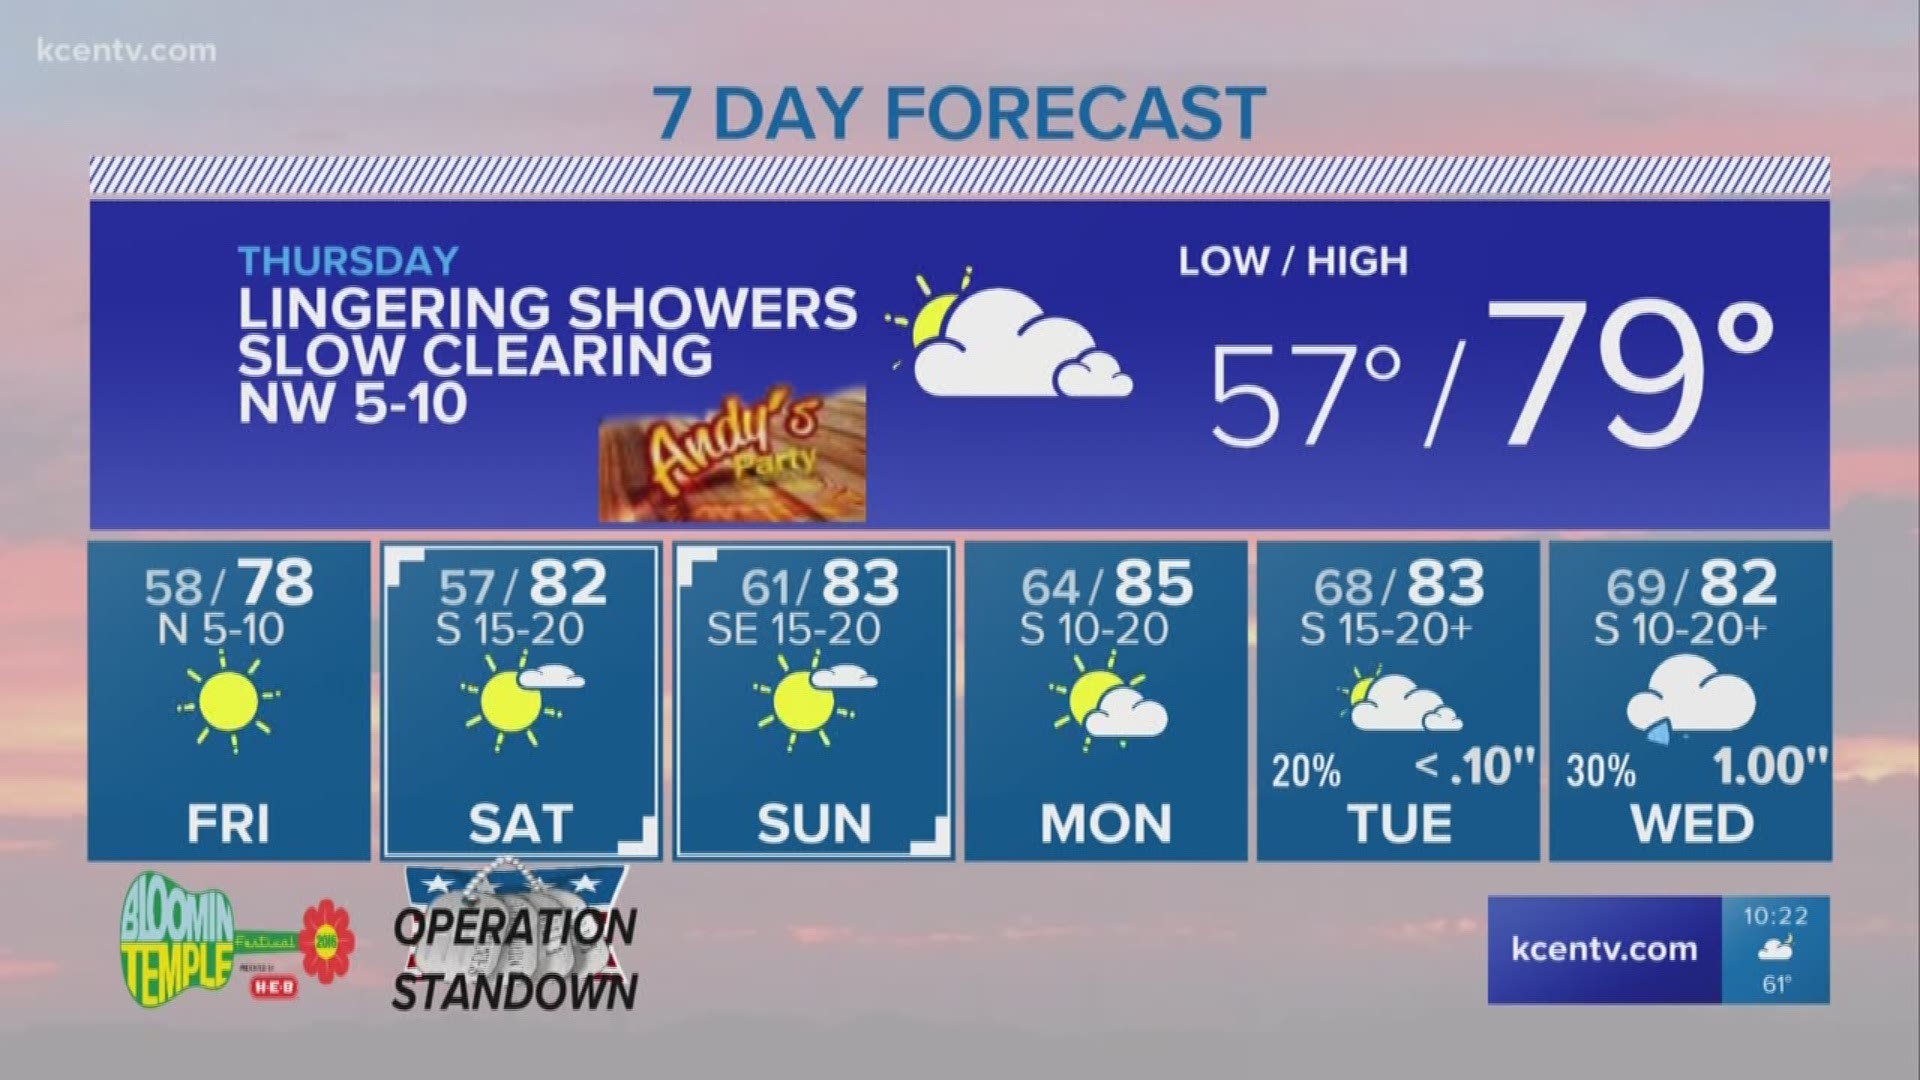 Chief meteorologist Andy Andersen says to expect lingering showers that clear slowly on Thursday.